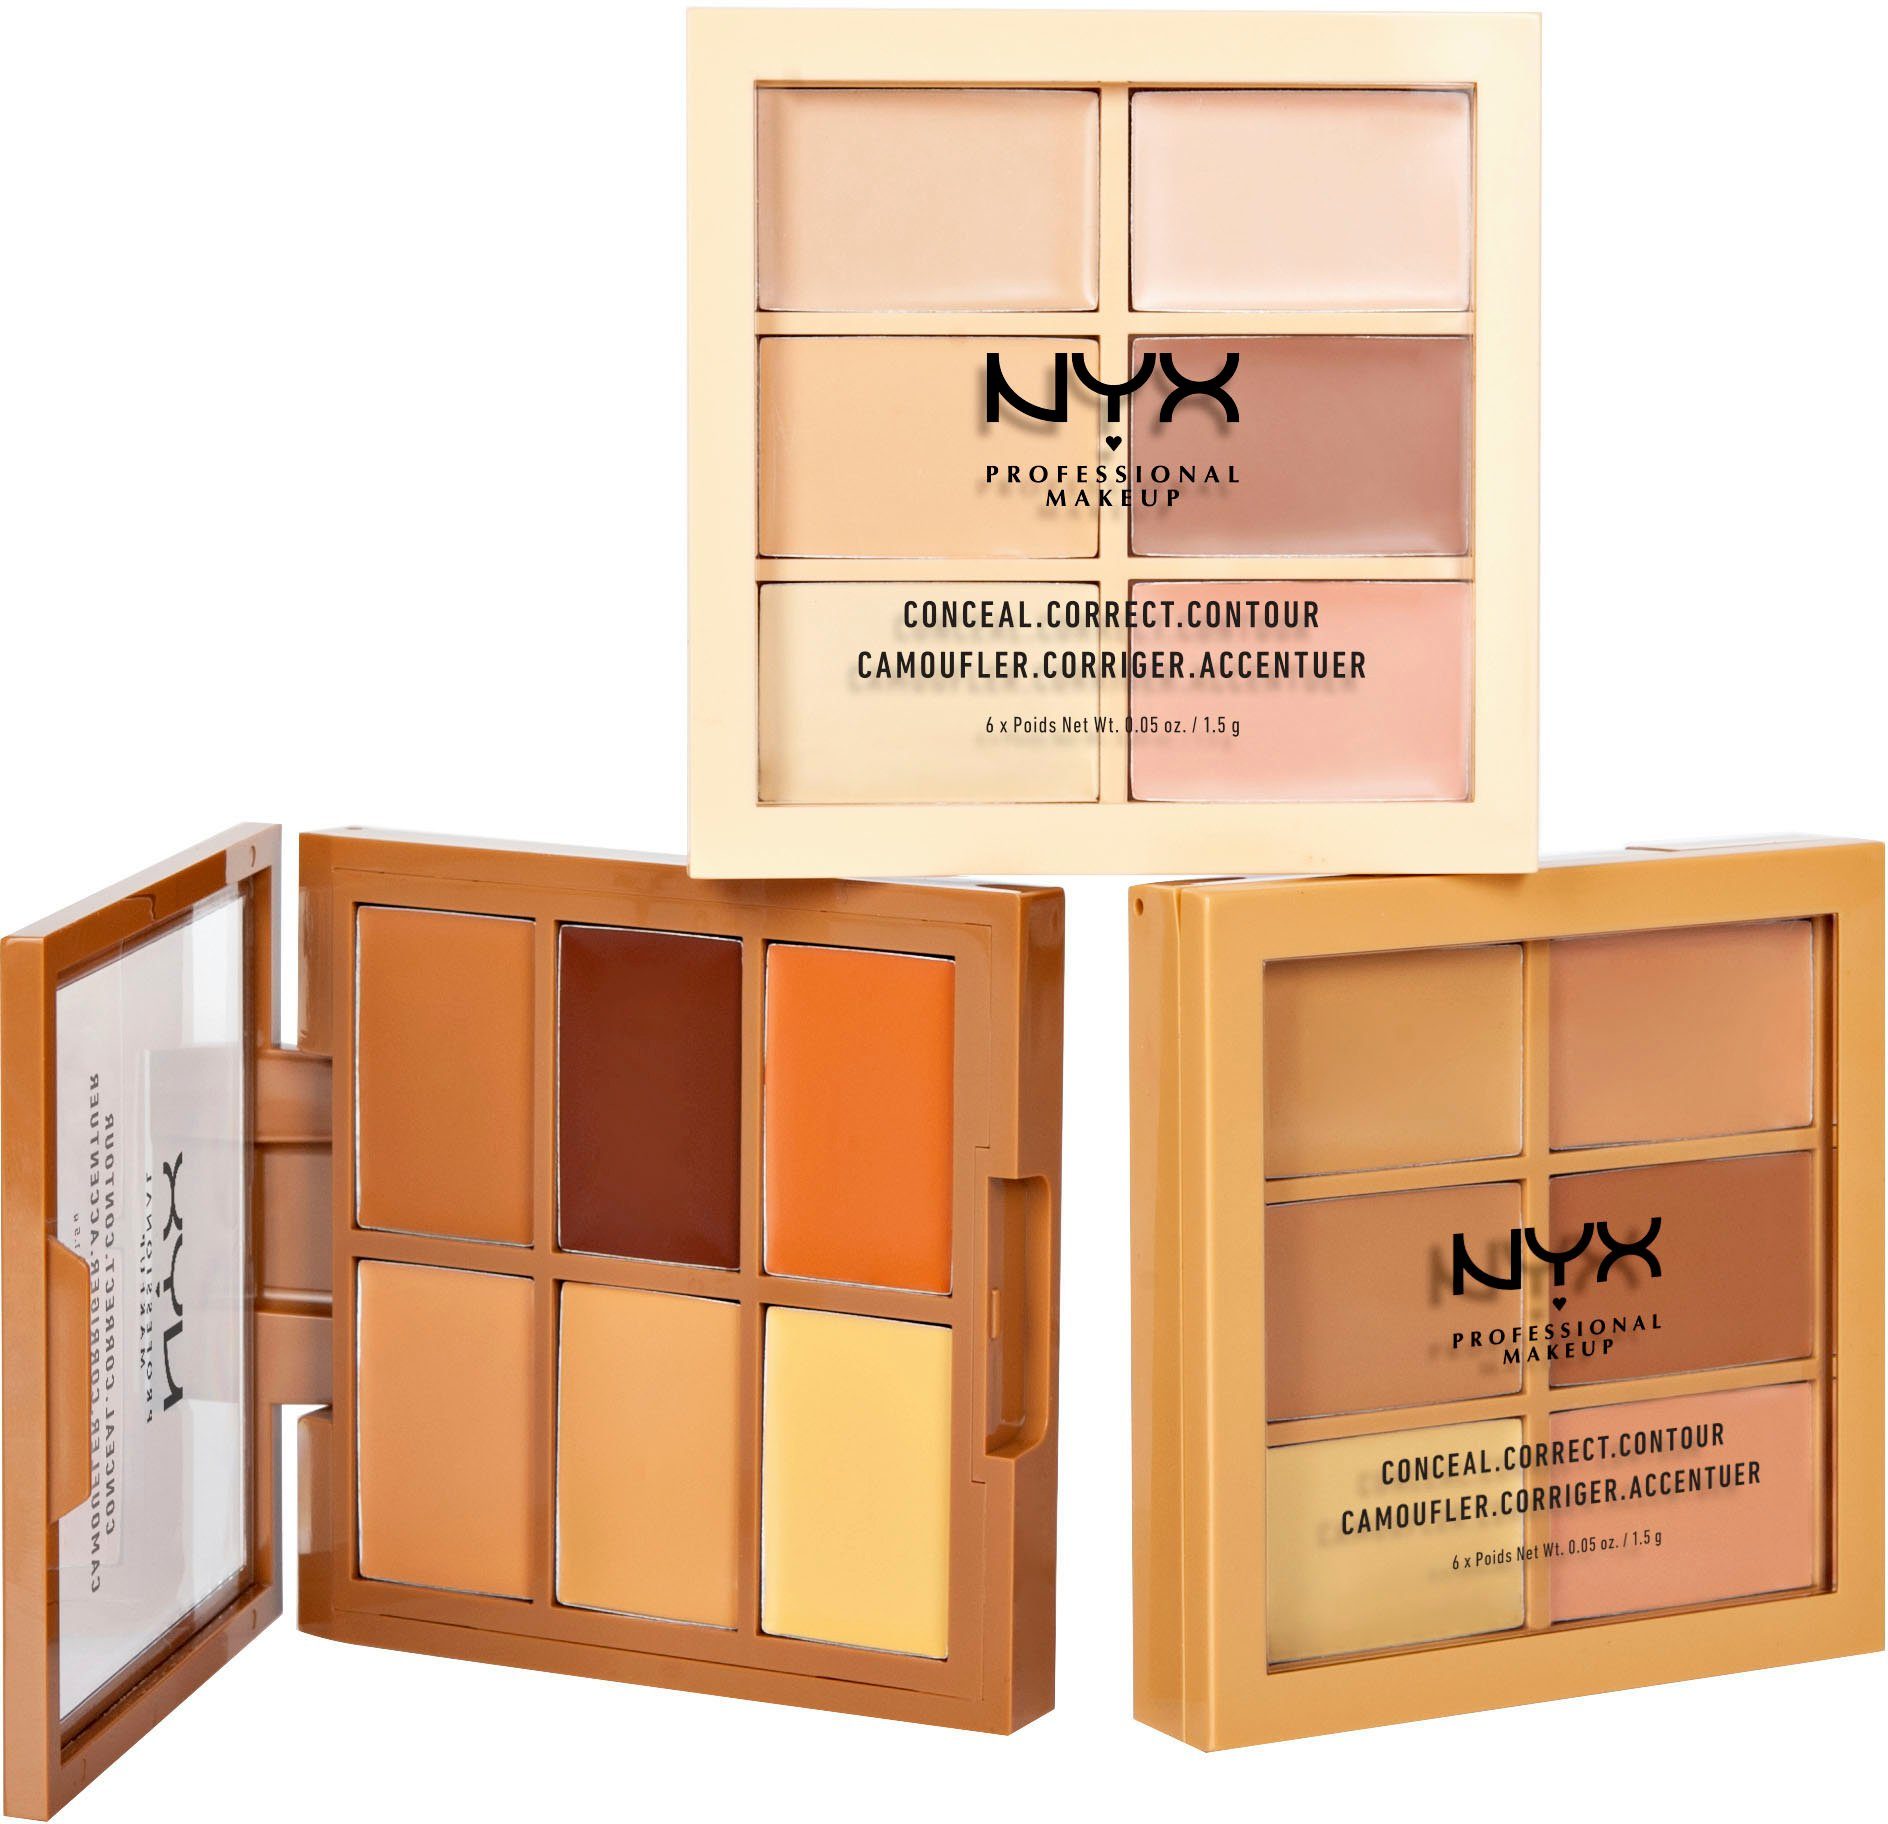 Makeup Professional Palette NYX Concealer Color Correcting NYX